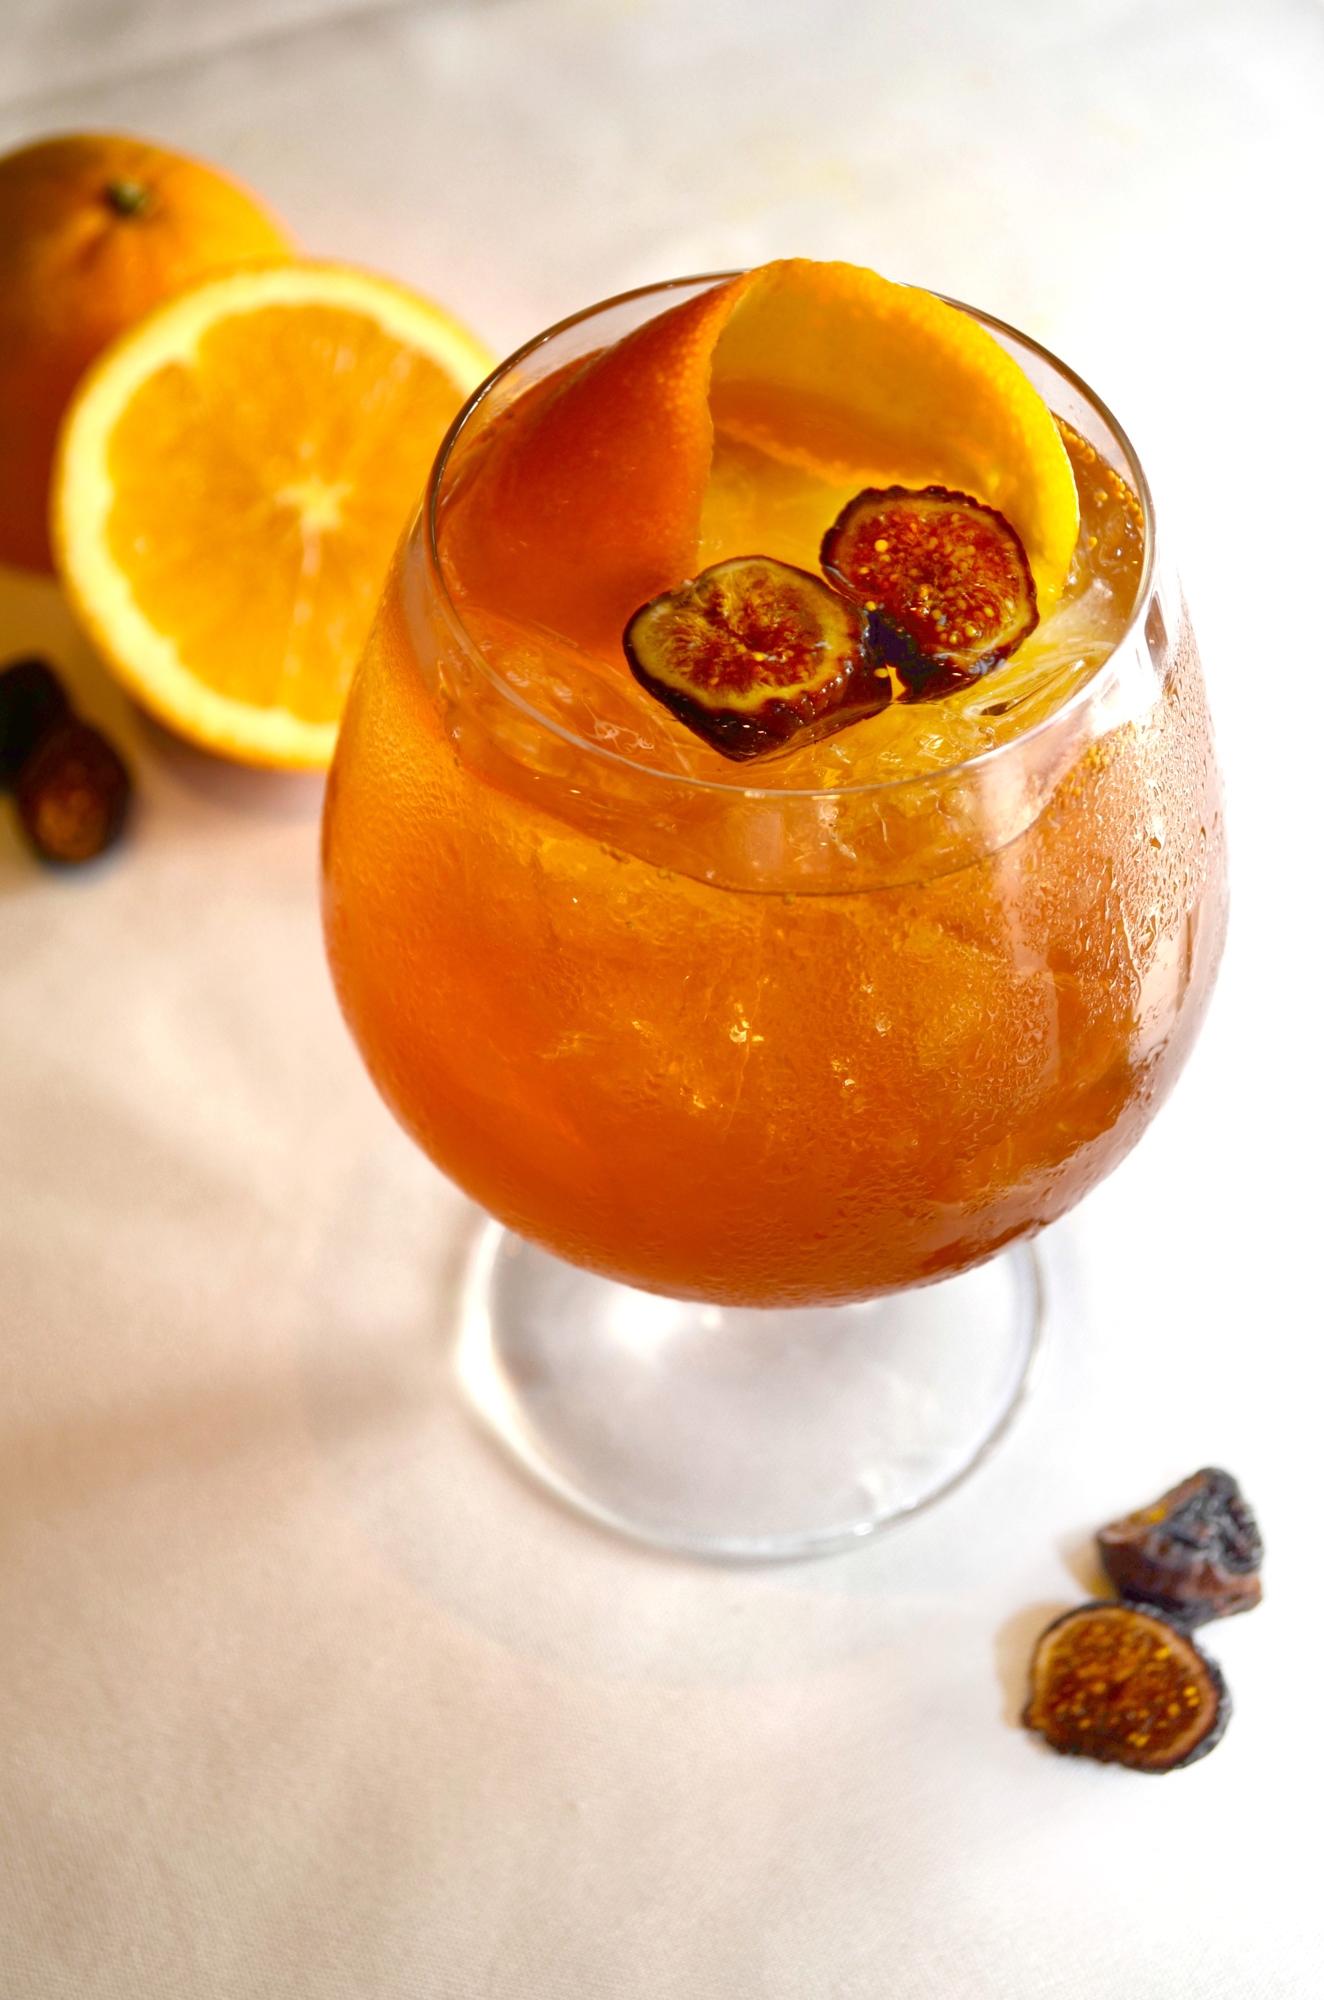 The Cape Town Fig Bramble is the newest cocktail on the Michael’s On East Lounge menu, and it features Inverroche Amber Gin, Poire Williams Liqueur and bitters. Courtesy photo